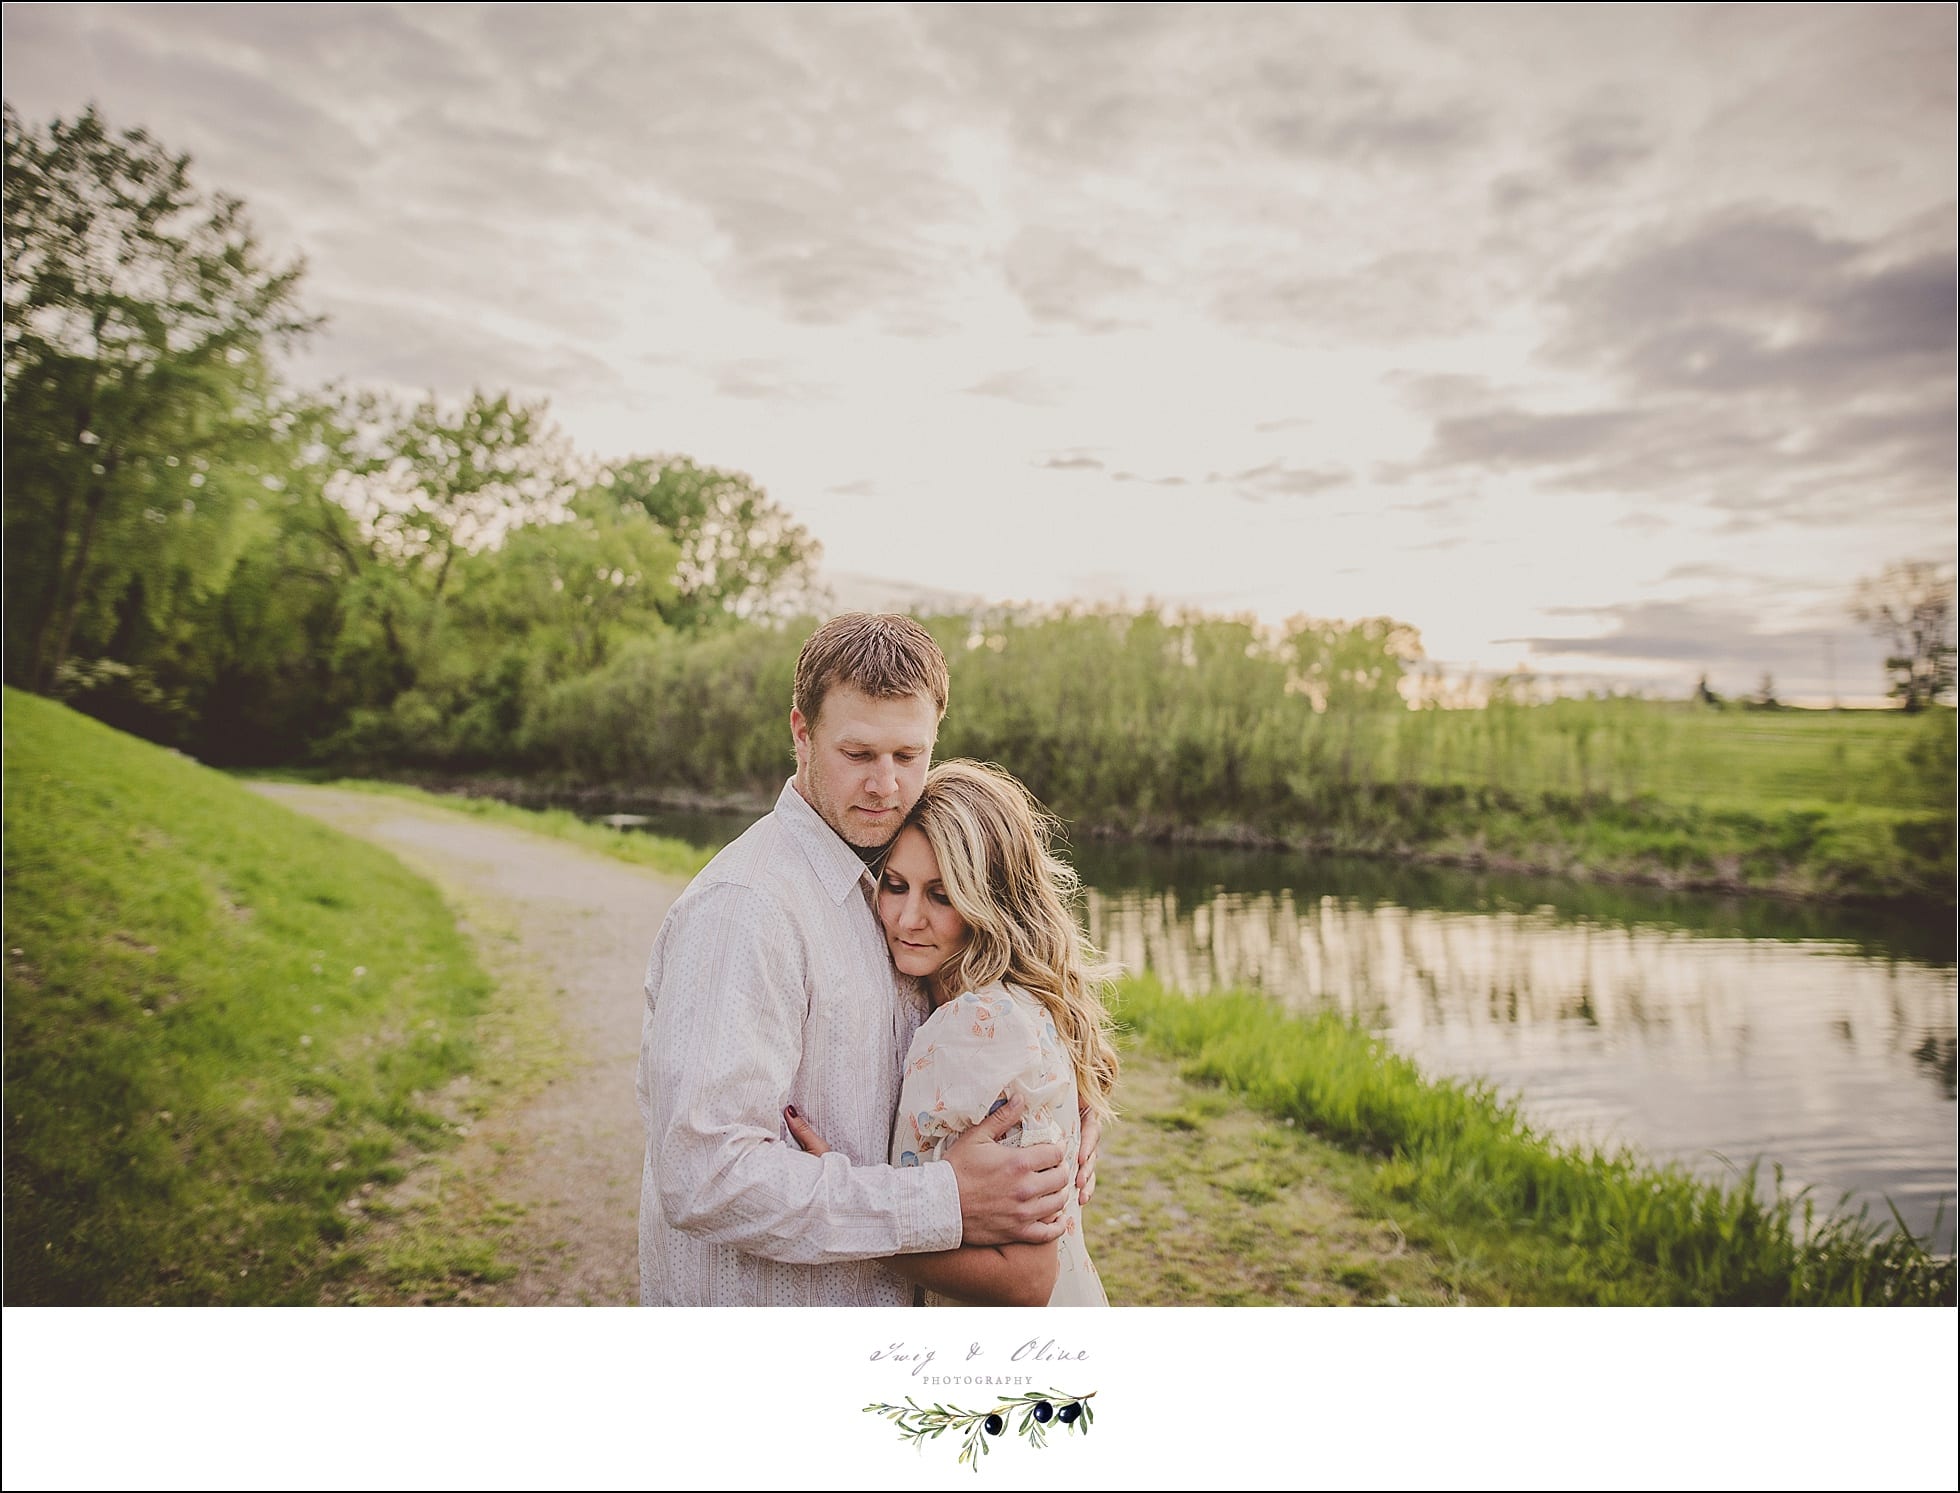 Stylized shoot, outdoor sessions, madison area photographers, beauty, love, cherish, embrace, don't let go, Dane county area stylized shoots, best day ever, 